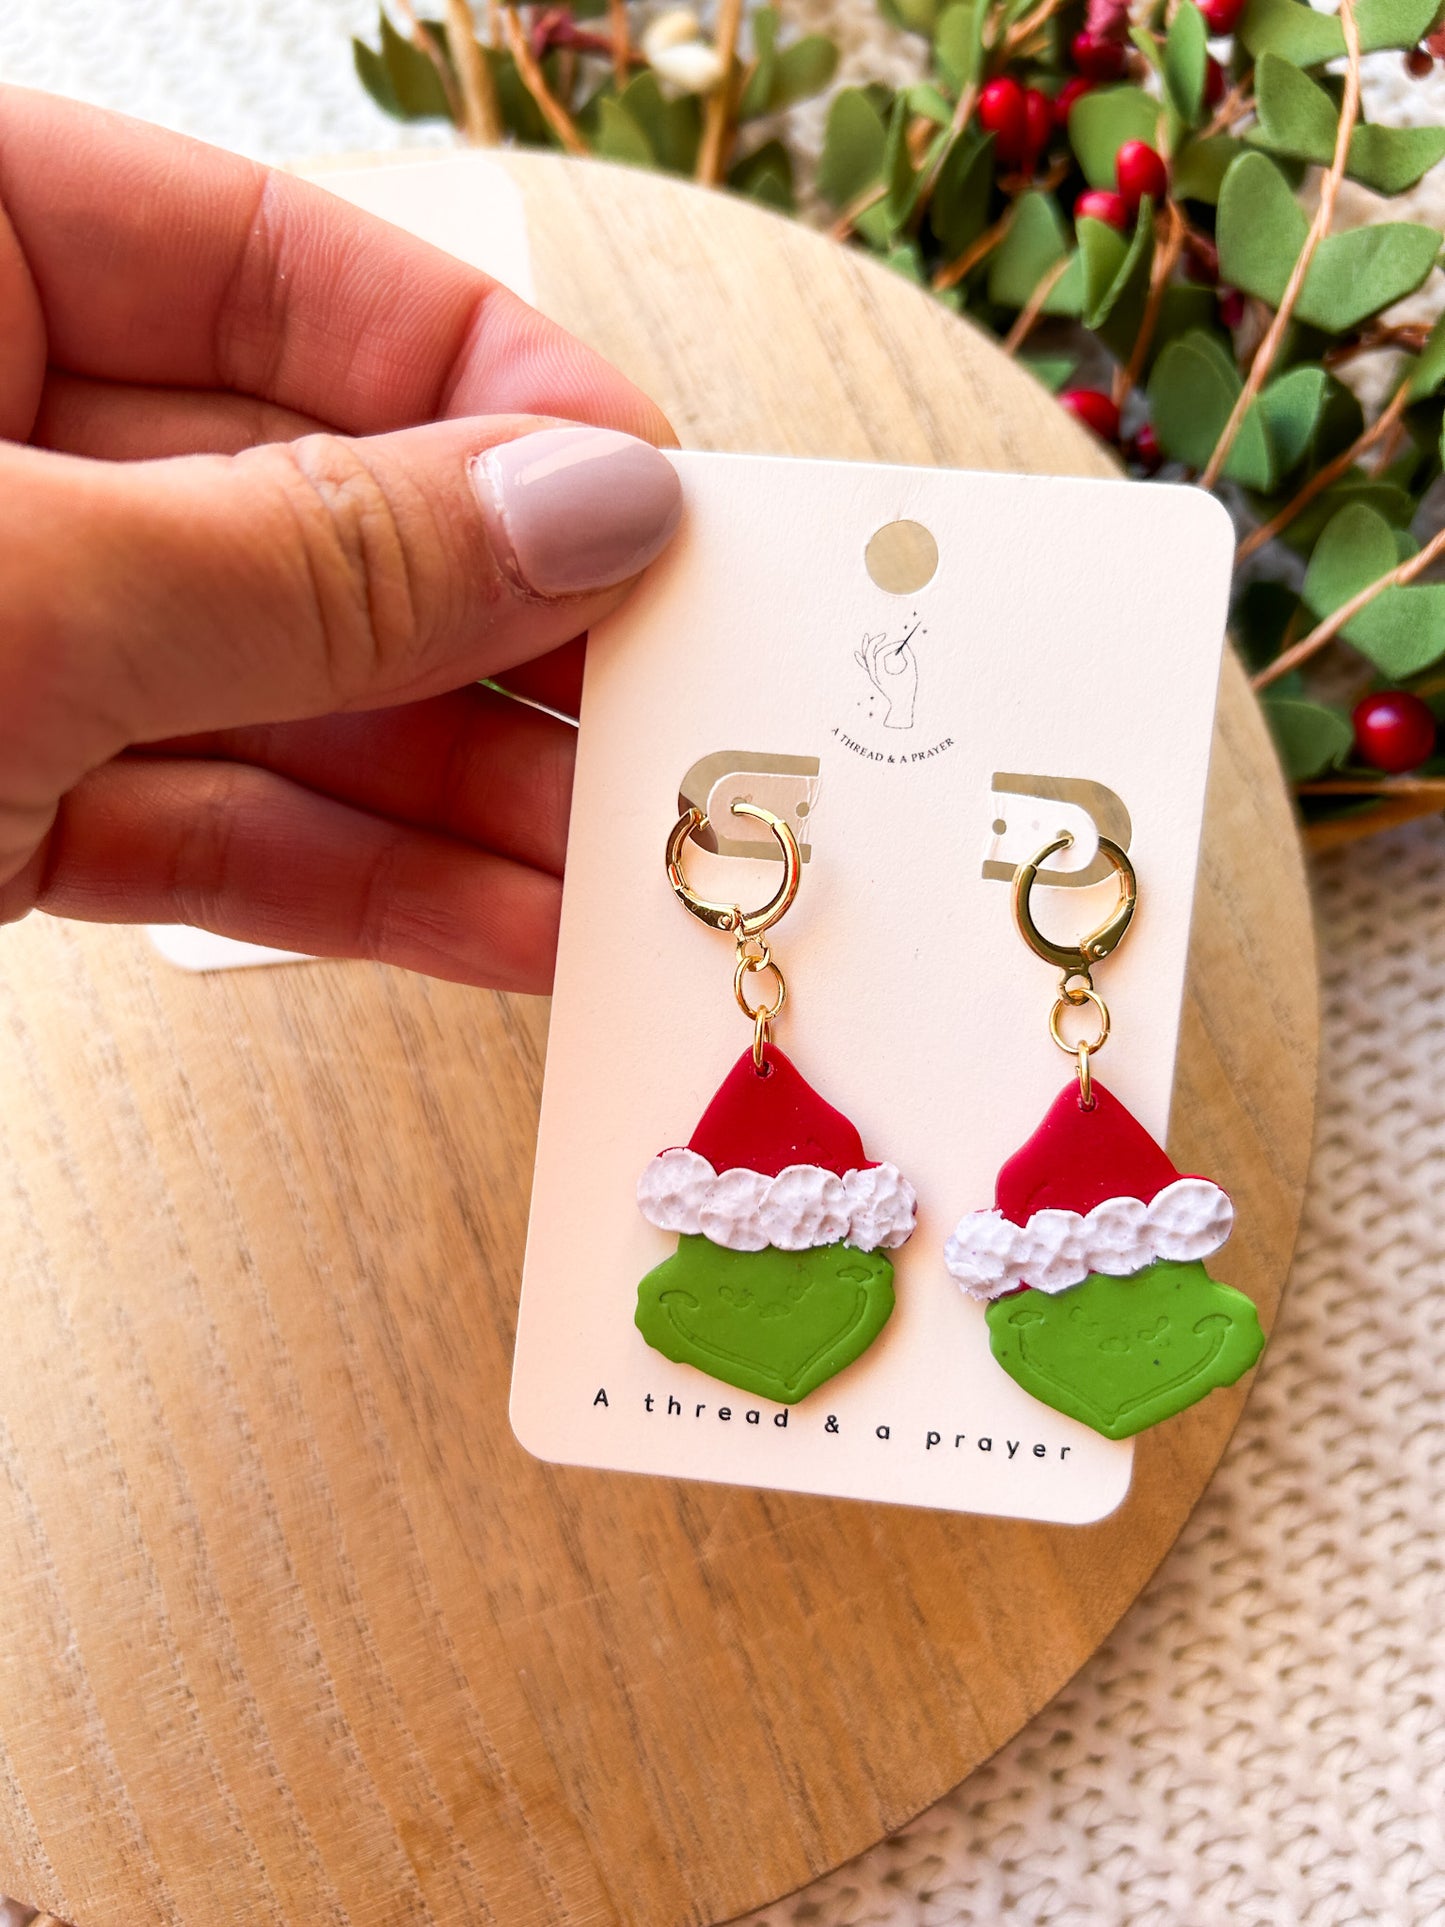 You're a Mean One Mr. Grinch Clay Earrings | Grinch Inspired | Christmas Earrings | Gift Earrings | Holiday Colors | Lightweight